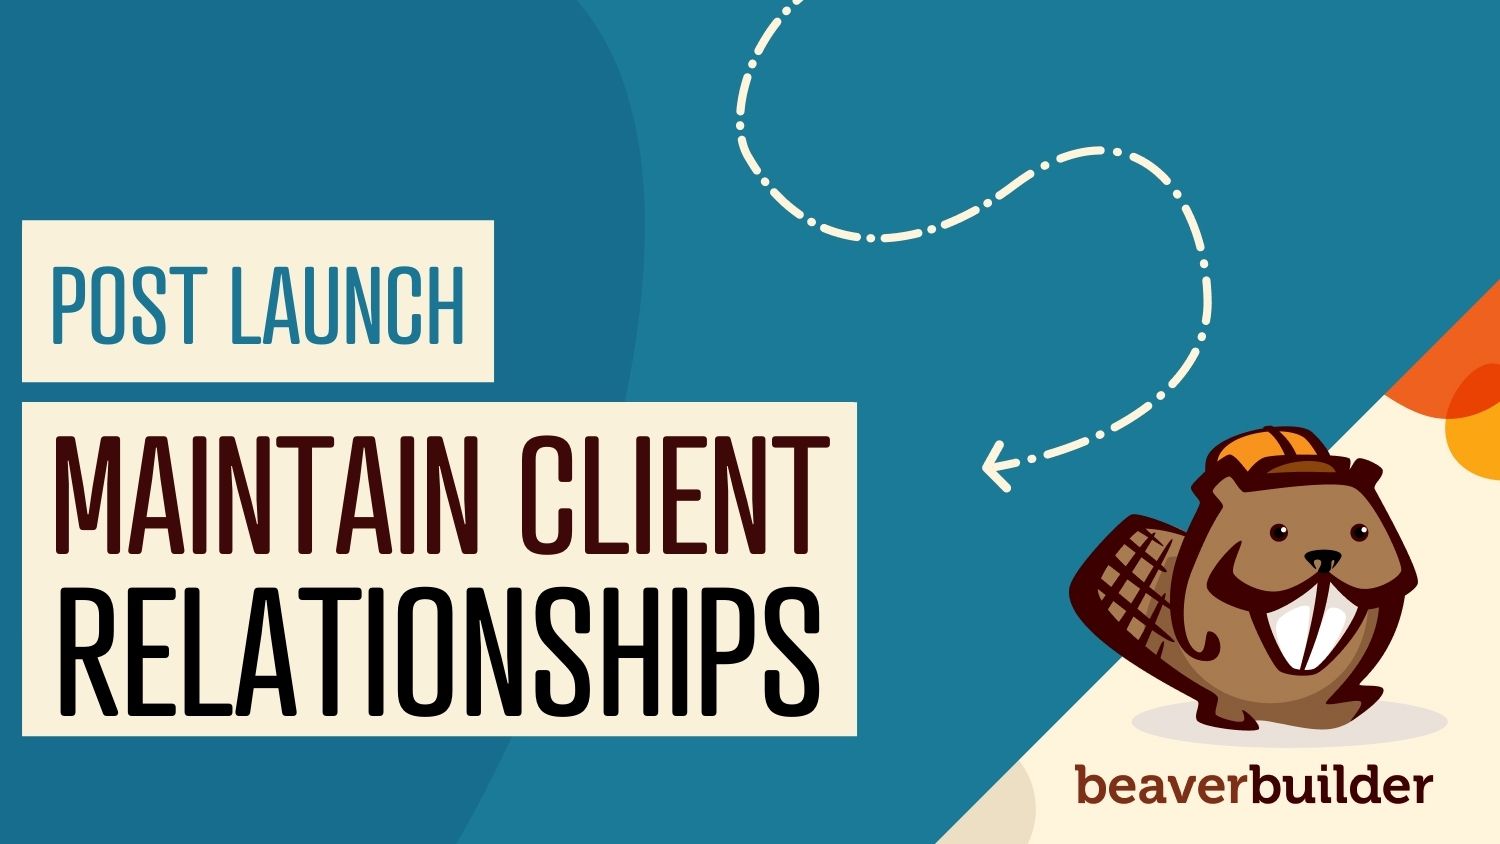 Post launch checklist: how to maintain client relationships